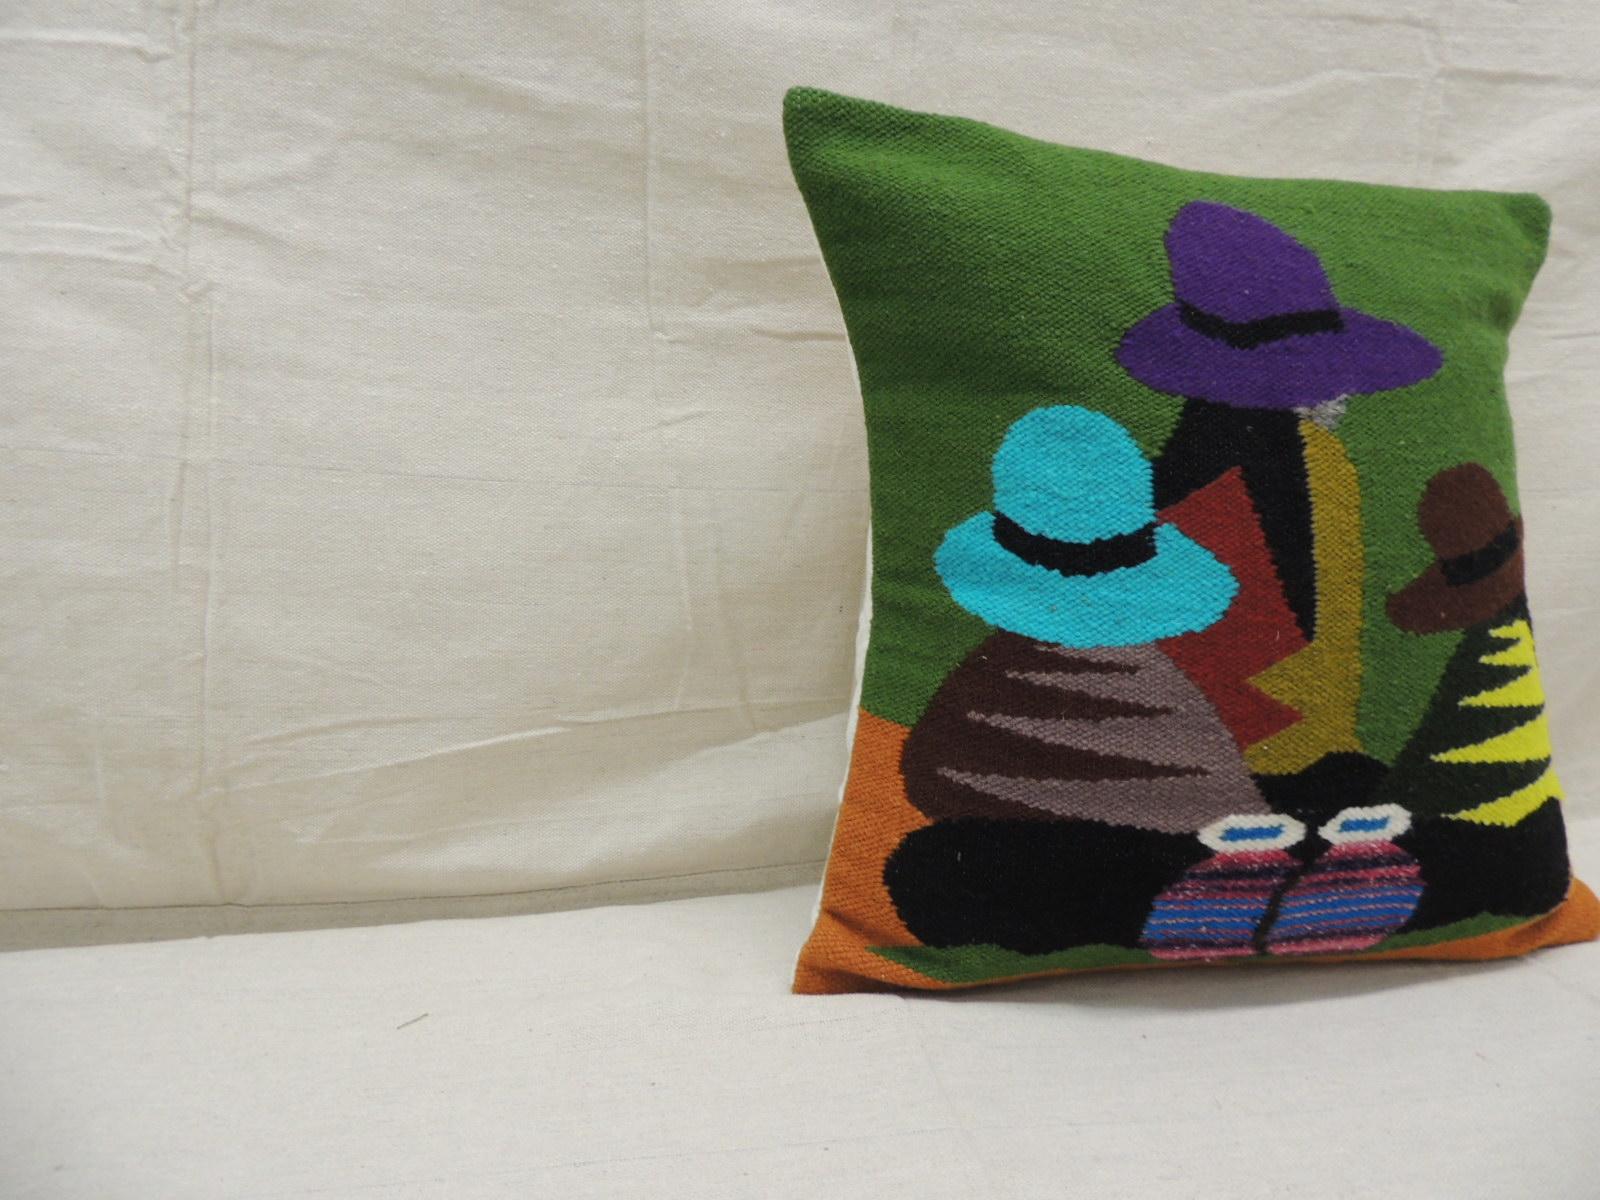 Traditional woven Ecuadorian decorative pillow.
In shades of purple, teal, green, yellow, red, blue and orange.
Decorative pillow handcrafted and designed in the USA. 
Closure slip-on with custom made pillow insert.
Size: 15